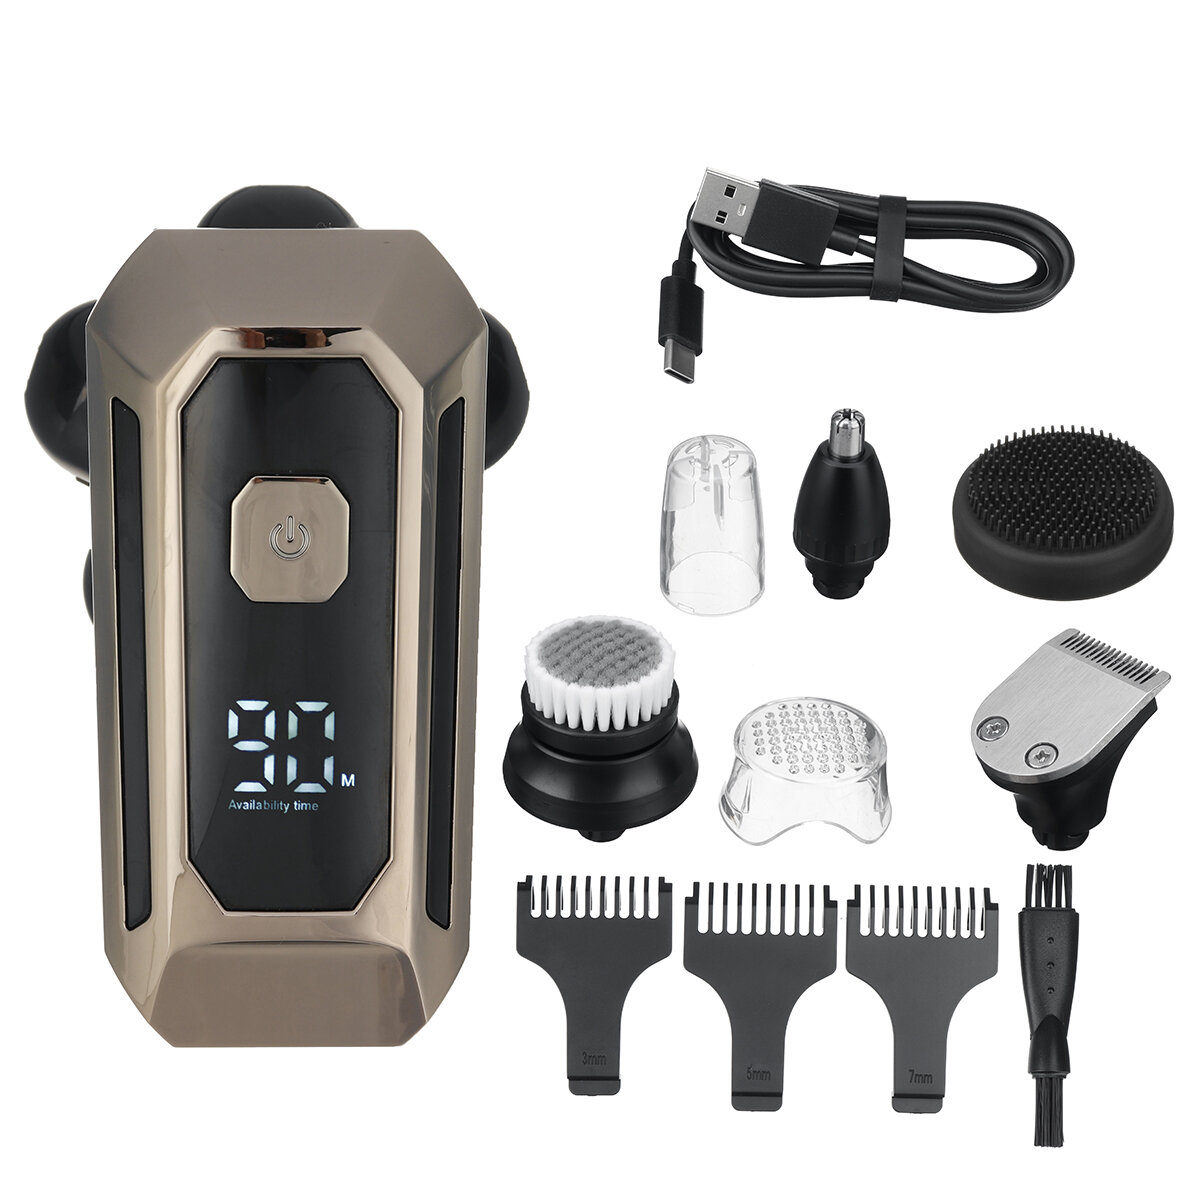 

5 IN 1 6D Rotary Electric Shaver USB Rechargeable Bald Head Shaver IPX7 Waterproof LED Display